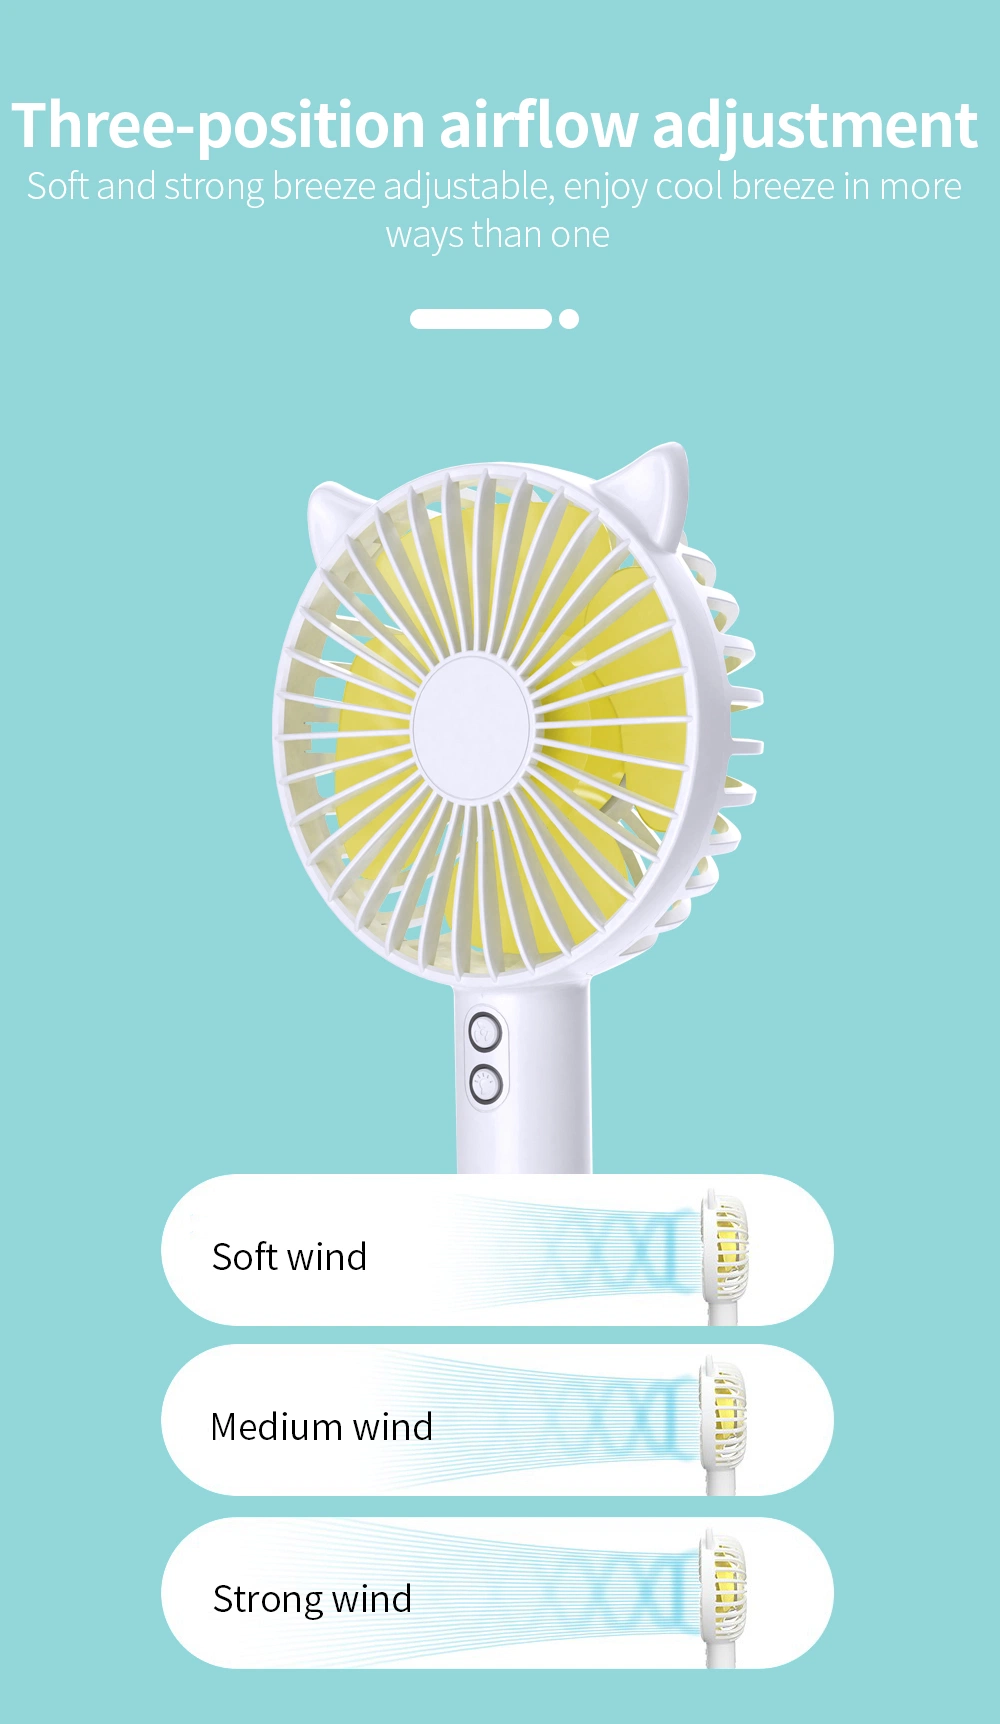 Summer Promotional Gift Amazon Hot Sale Drop Shipping Chargeable Fan Hand USB Desktop Fans Mini Small with Atmosphere Lamp Gifts